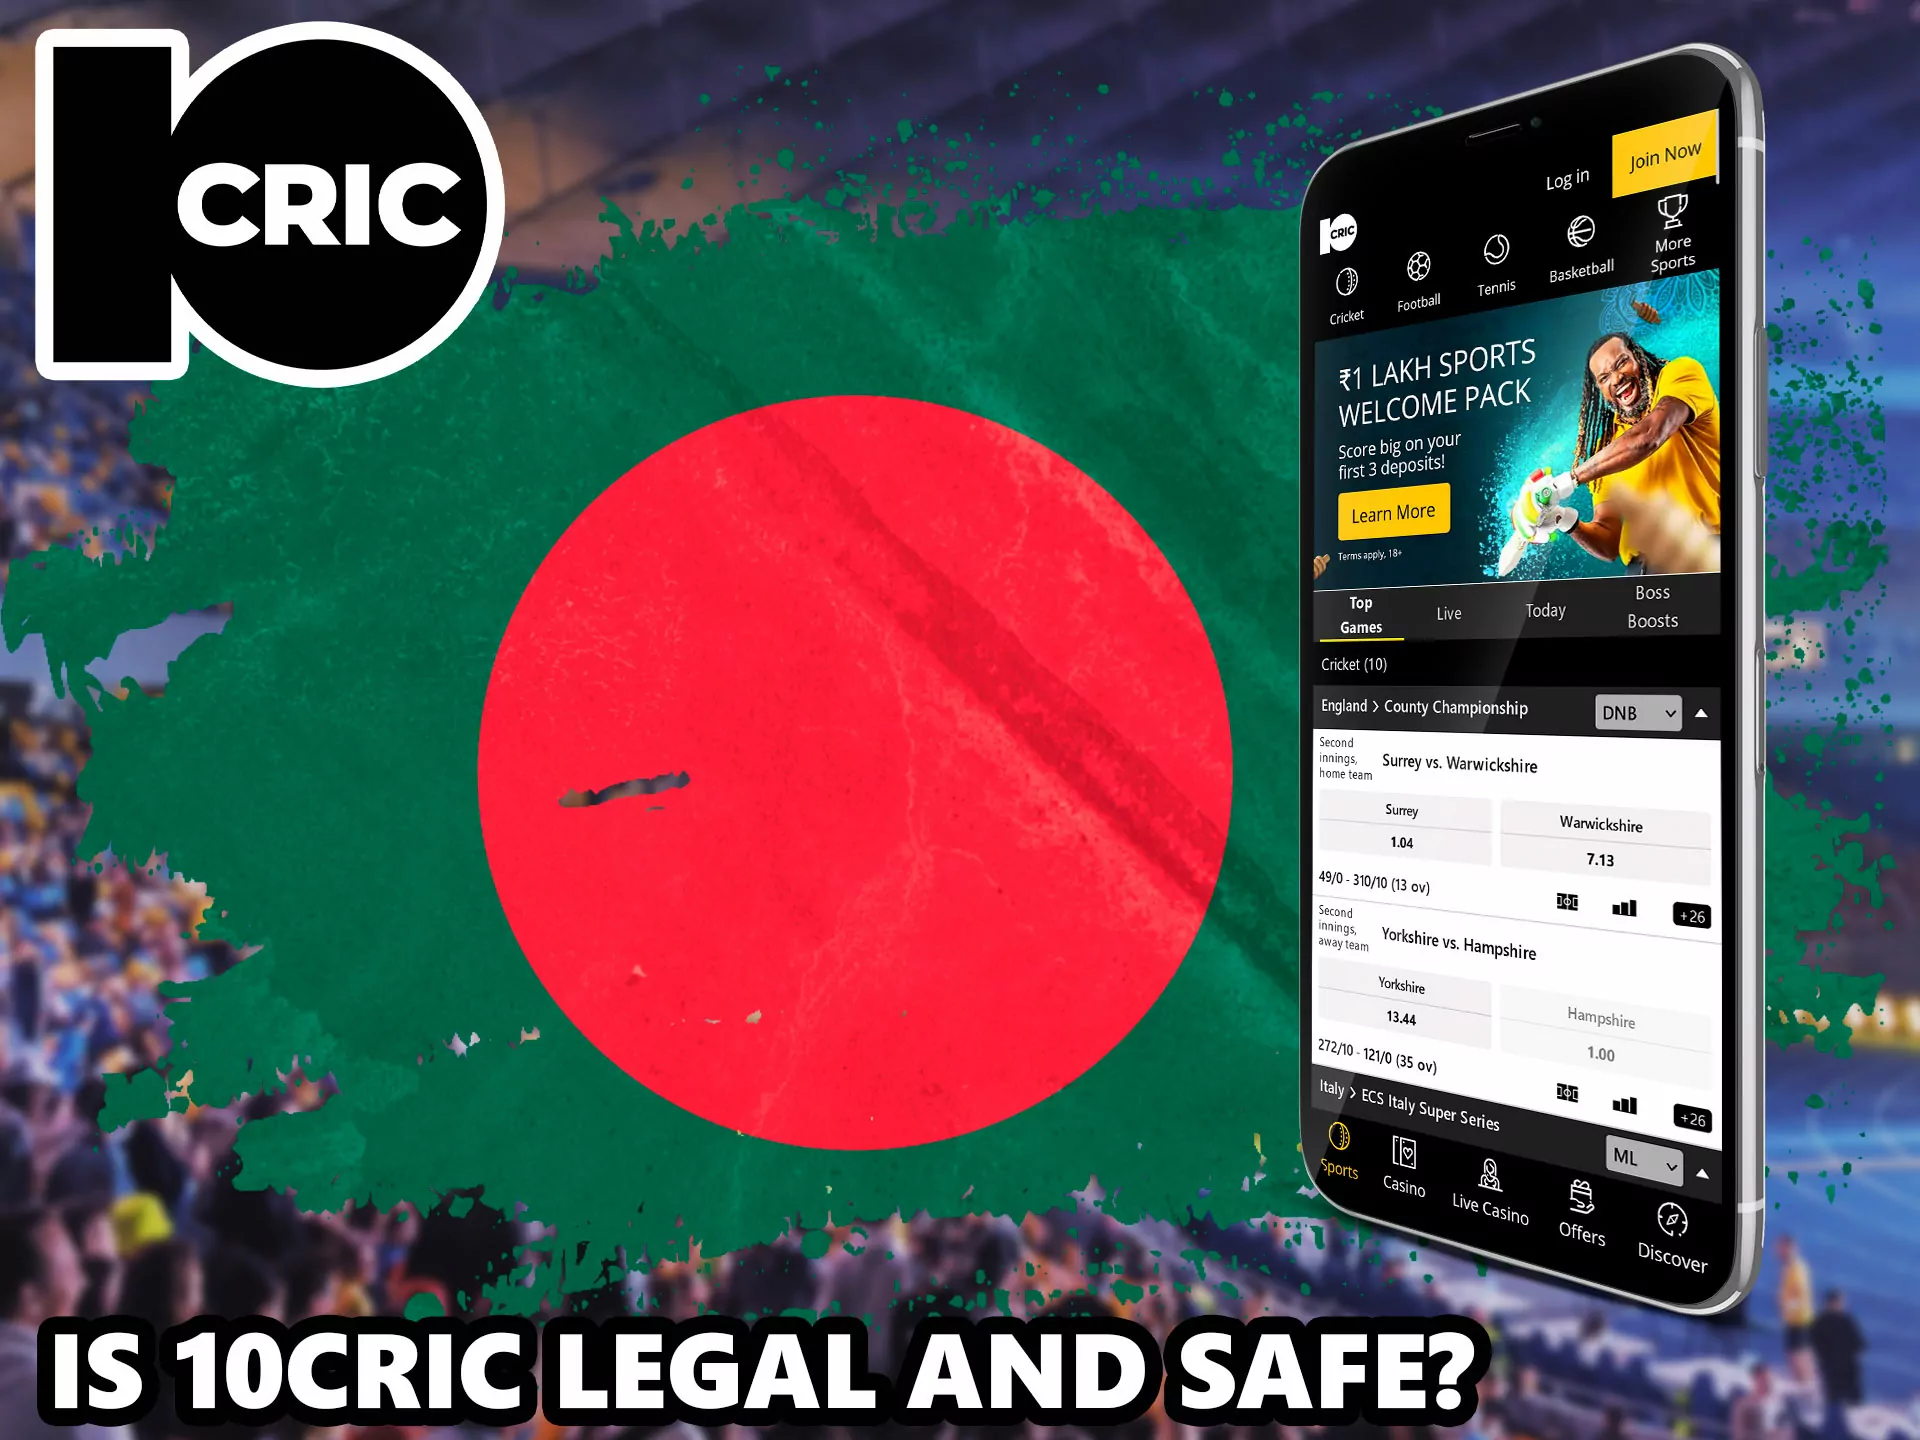 The safety of the bookmaker is not worth worrying about, as it is protected by a special license, and also complies with all laws, online betting games are officially allowed in Bangladesh.